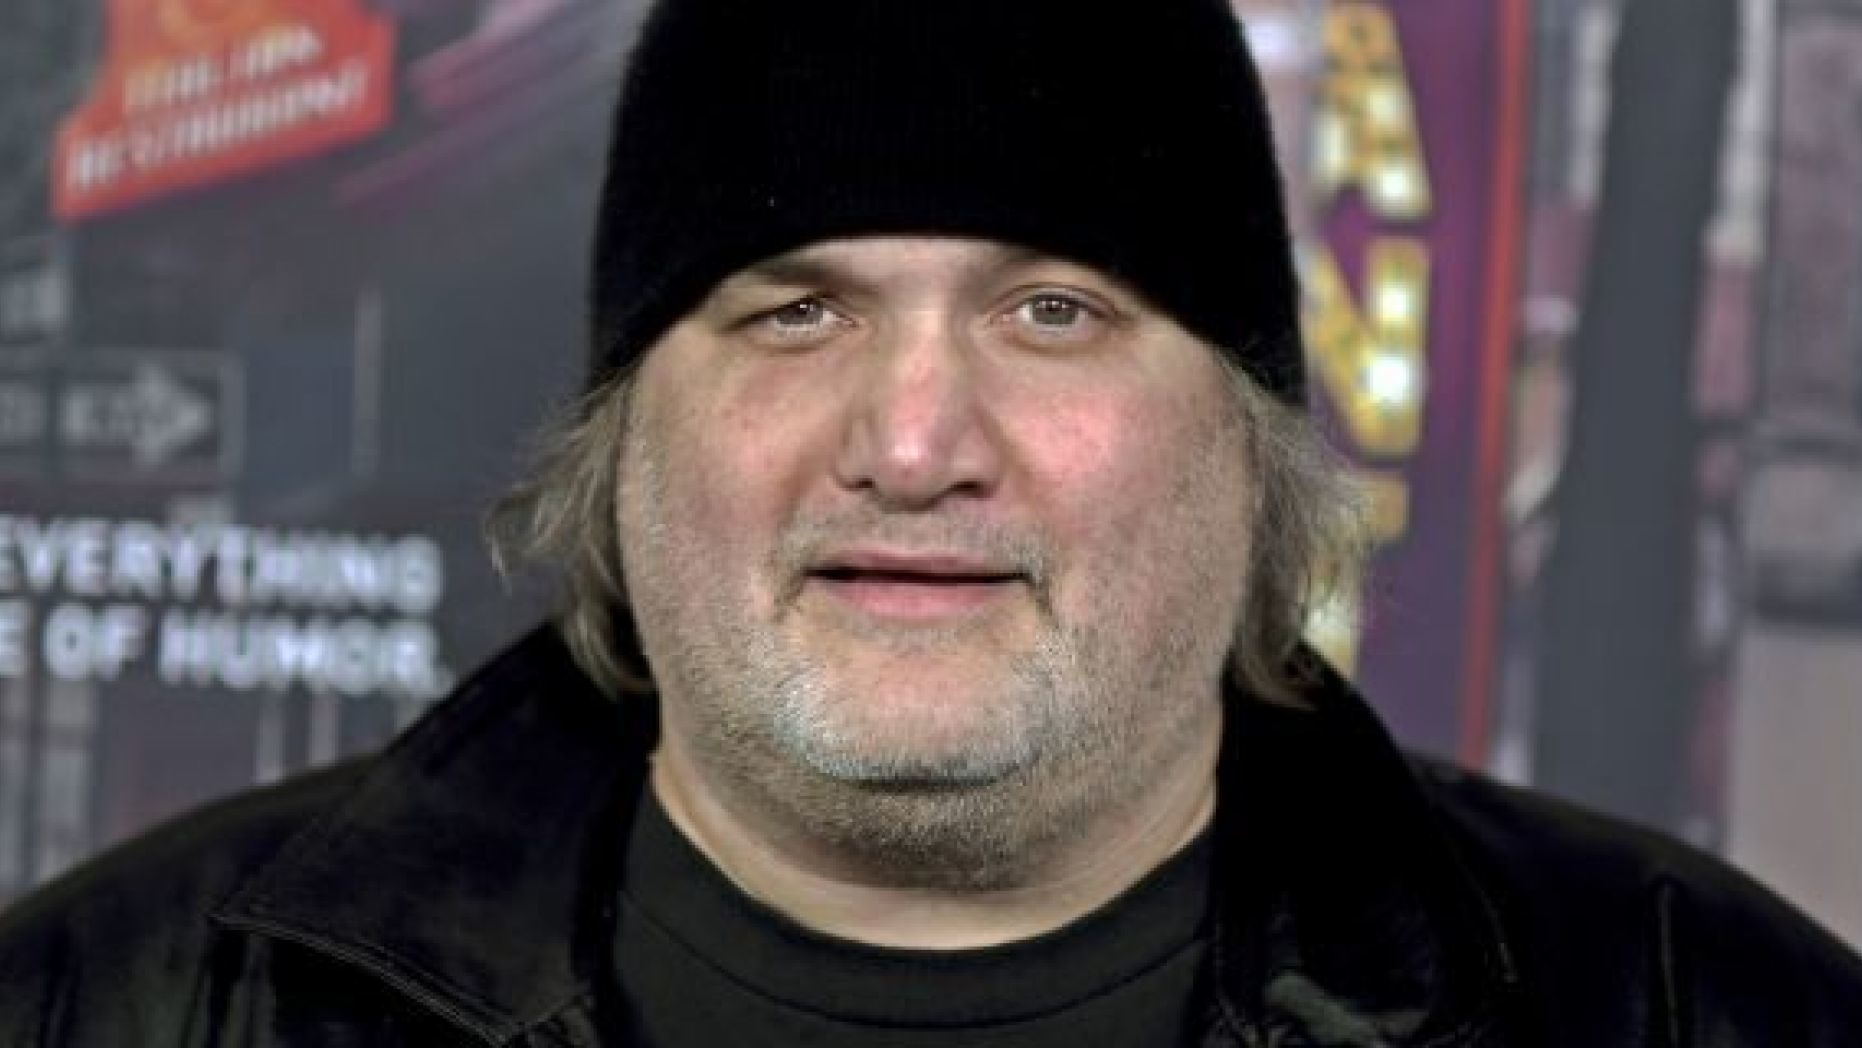 FILE – In this Feb. 15, 2017, file photo, comedian Artie Lange attends a premiere for HBO's television comedy series "Crashing," in Los Angeles. A judge has spared comedian Artie Lange jail time even though he tested positive for cocaine and amphetamine.